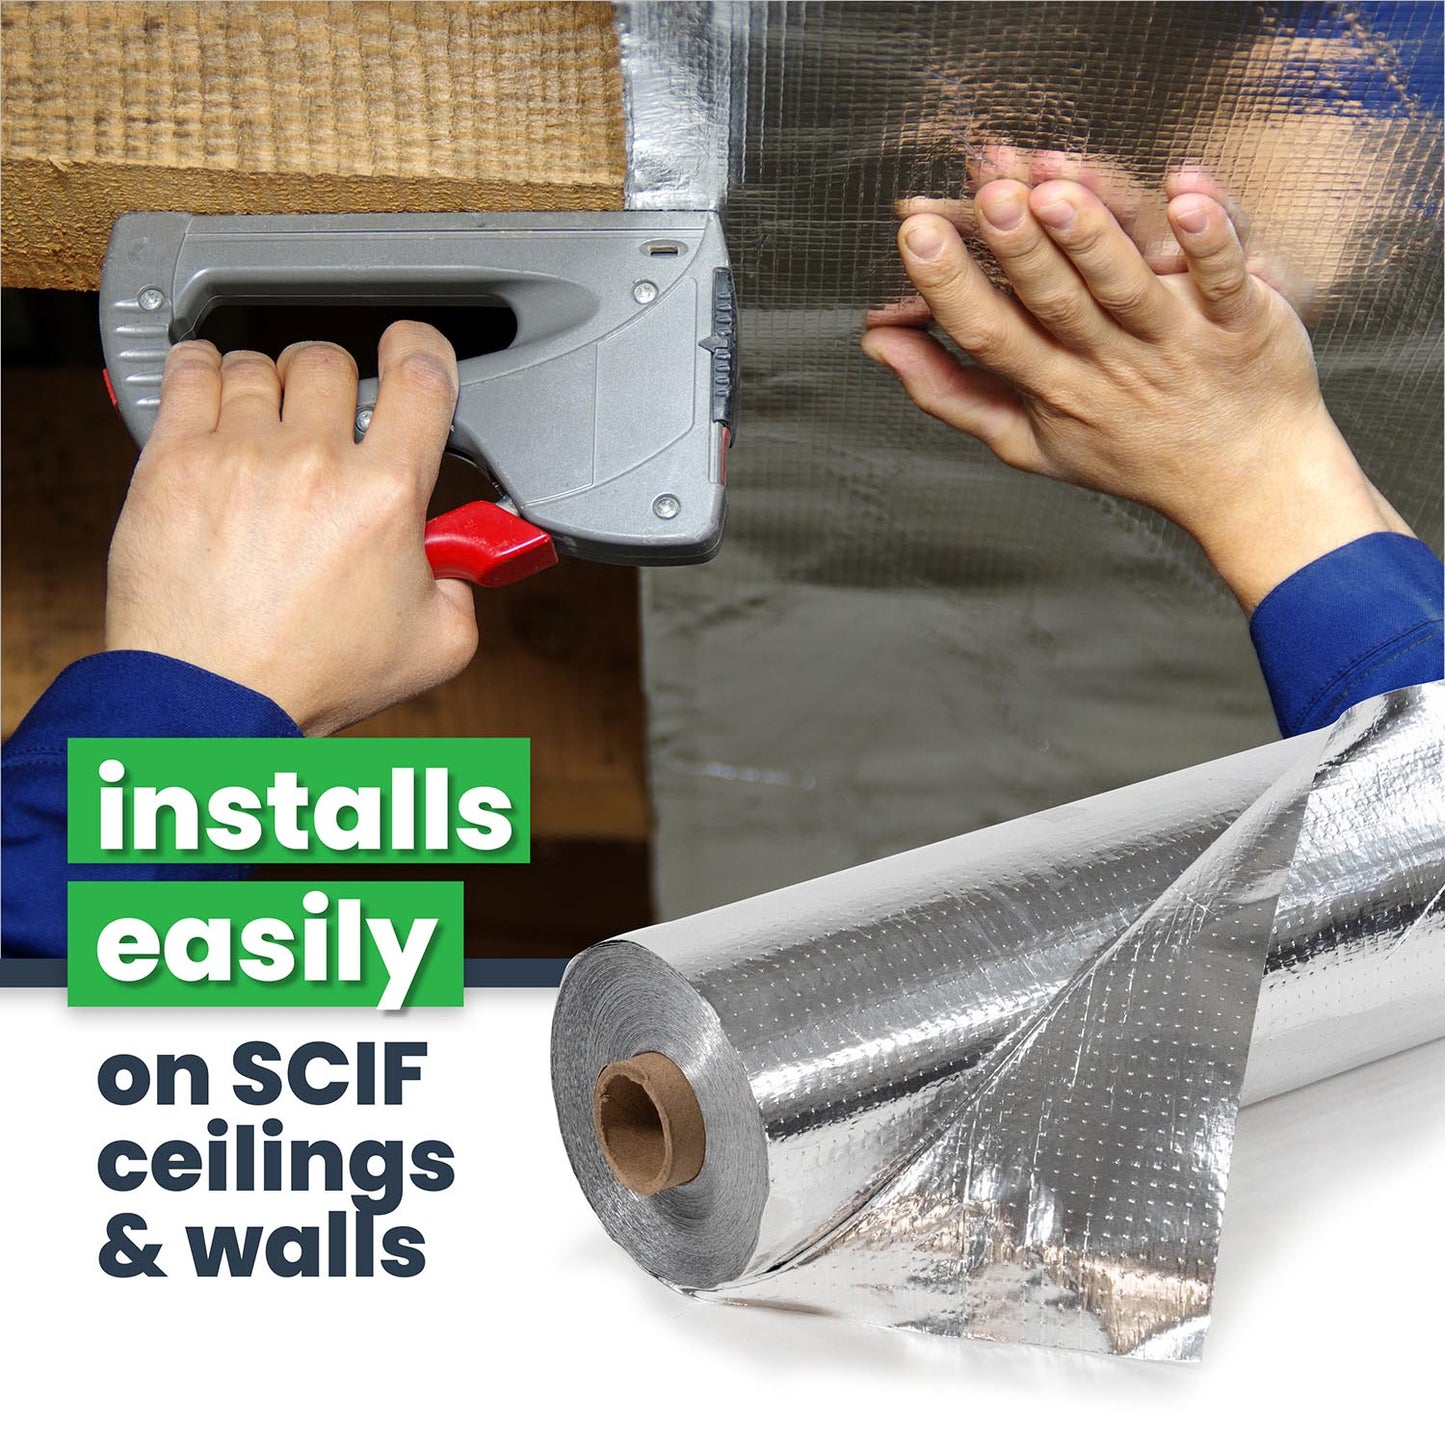 SCIF Barrier perforated installs easily on SCIF ceilings and walls